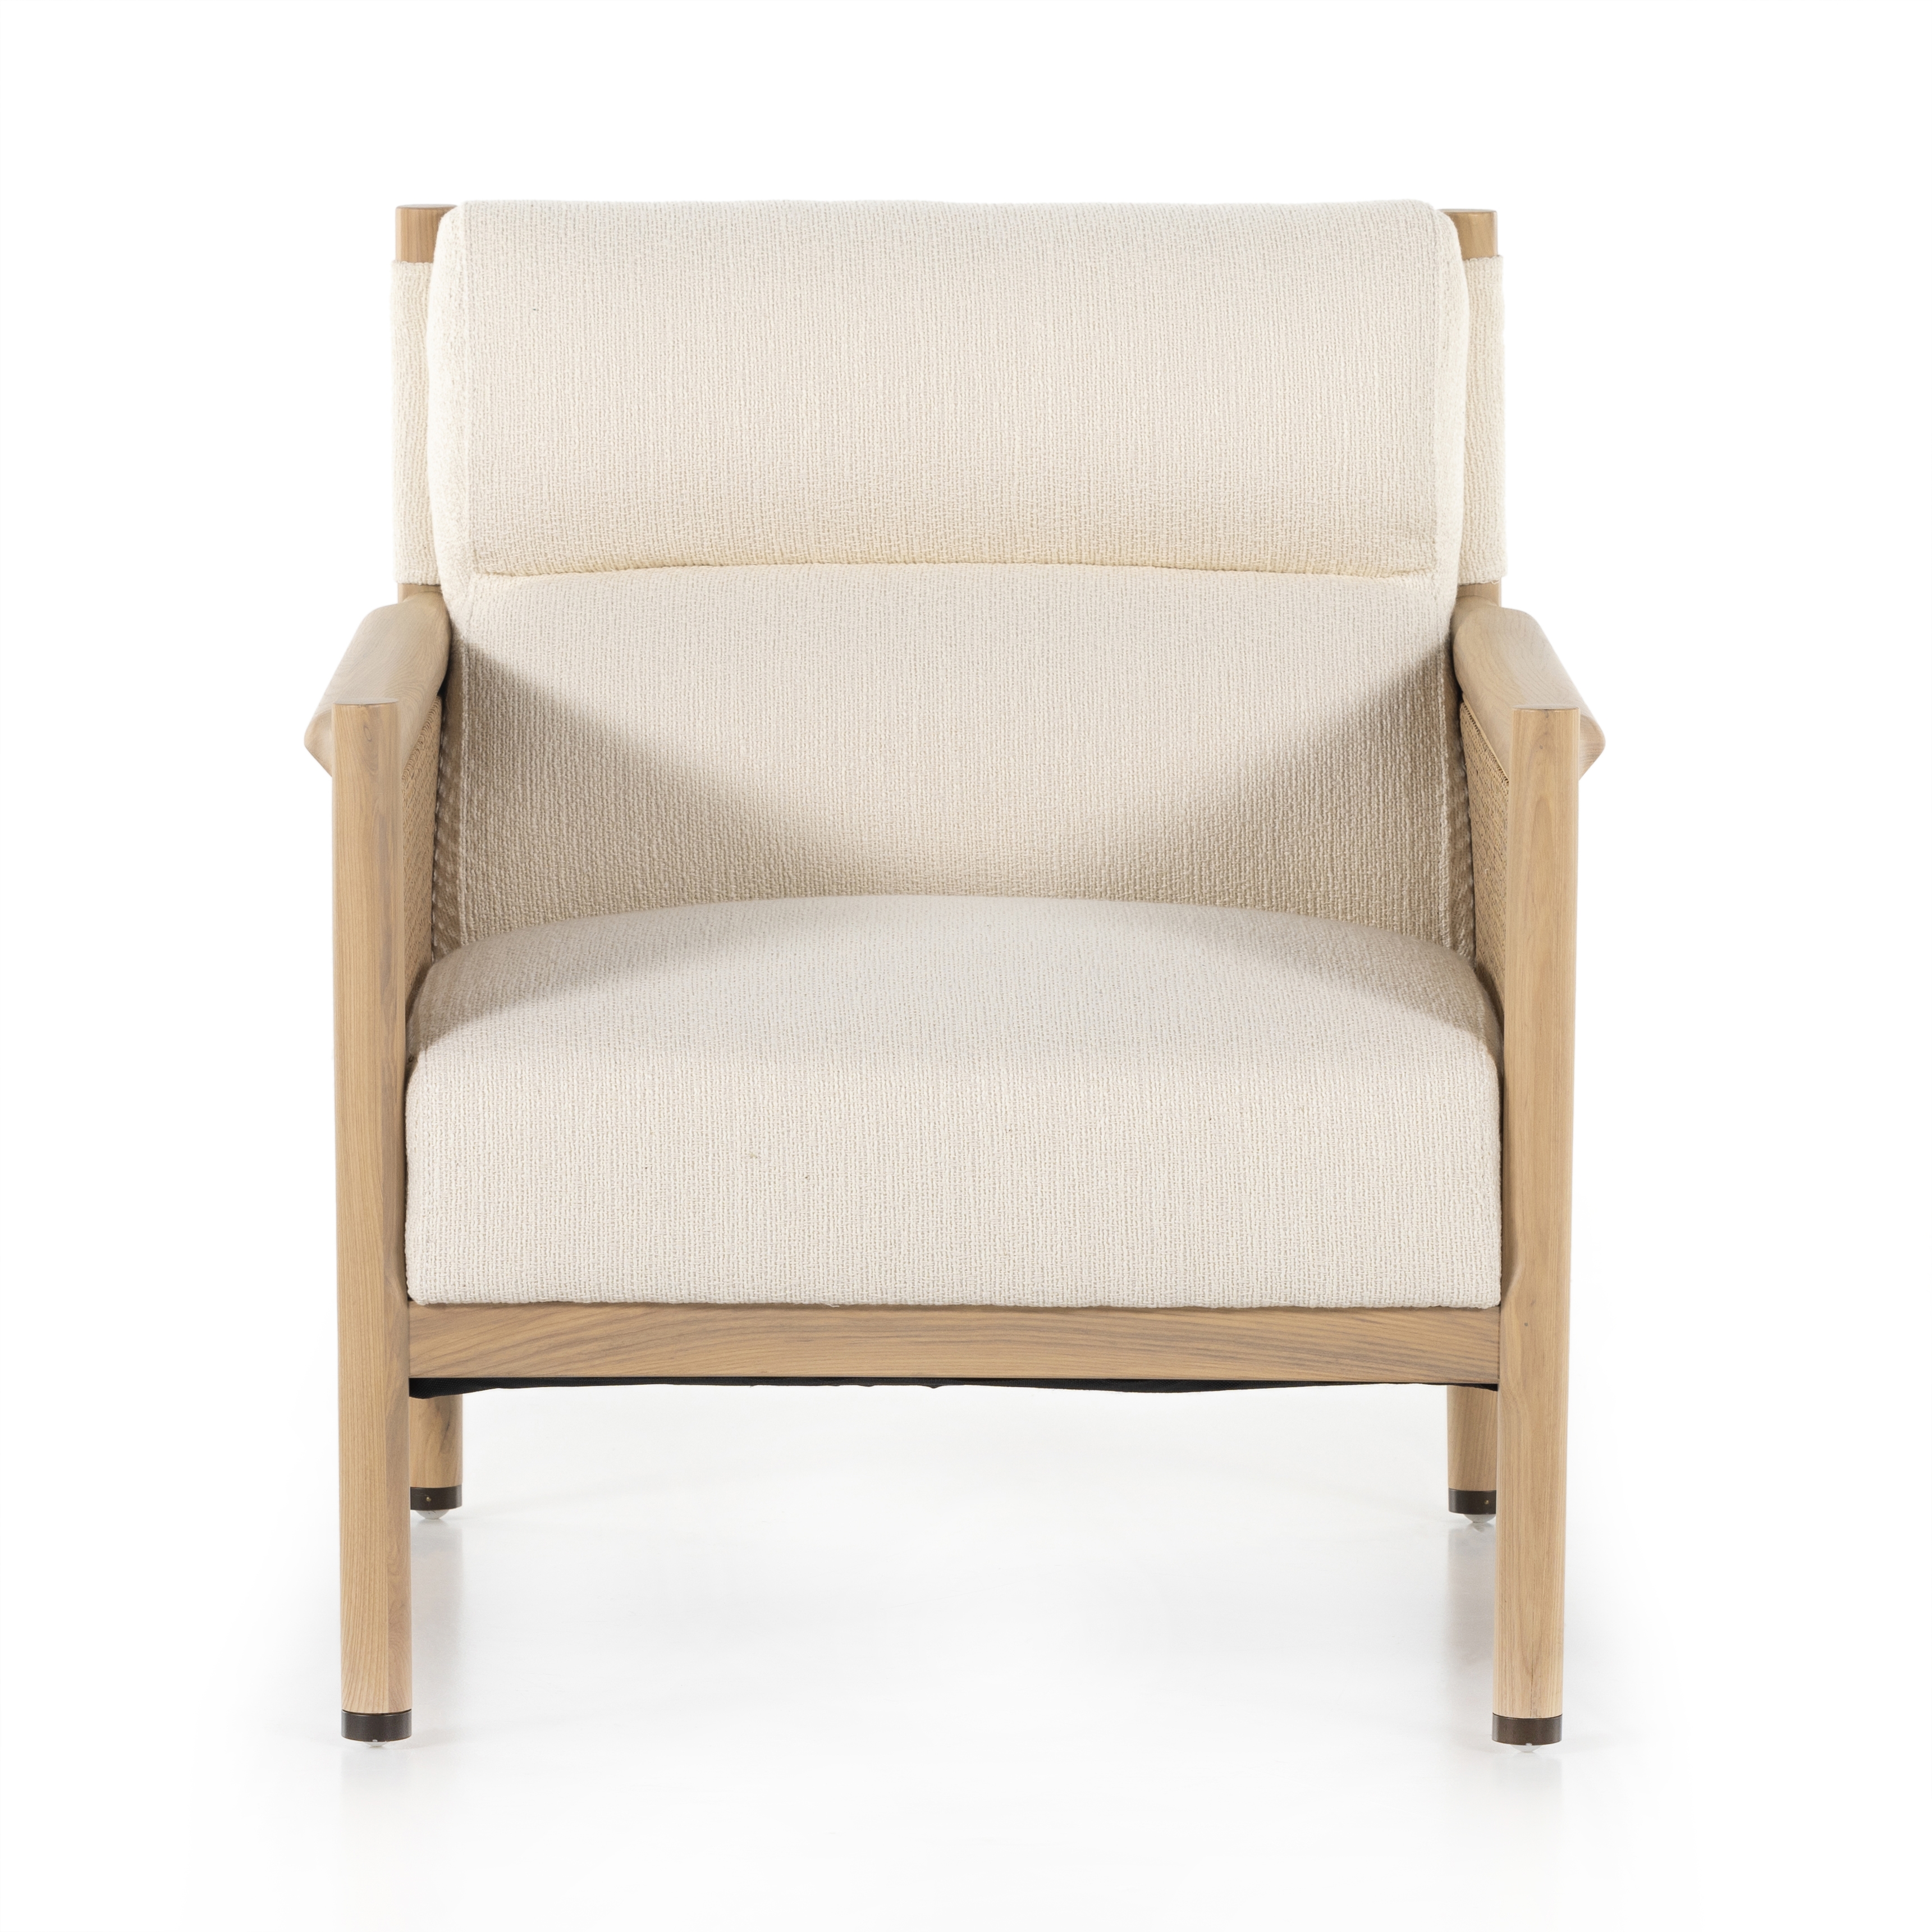 Kempsey Chair-Kerbey Ivory - Image 3